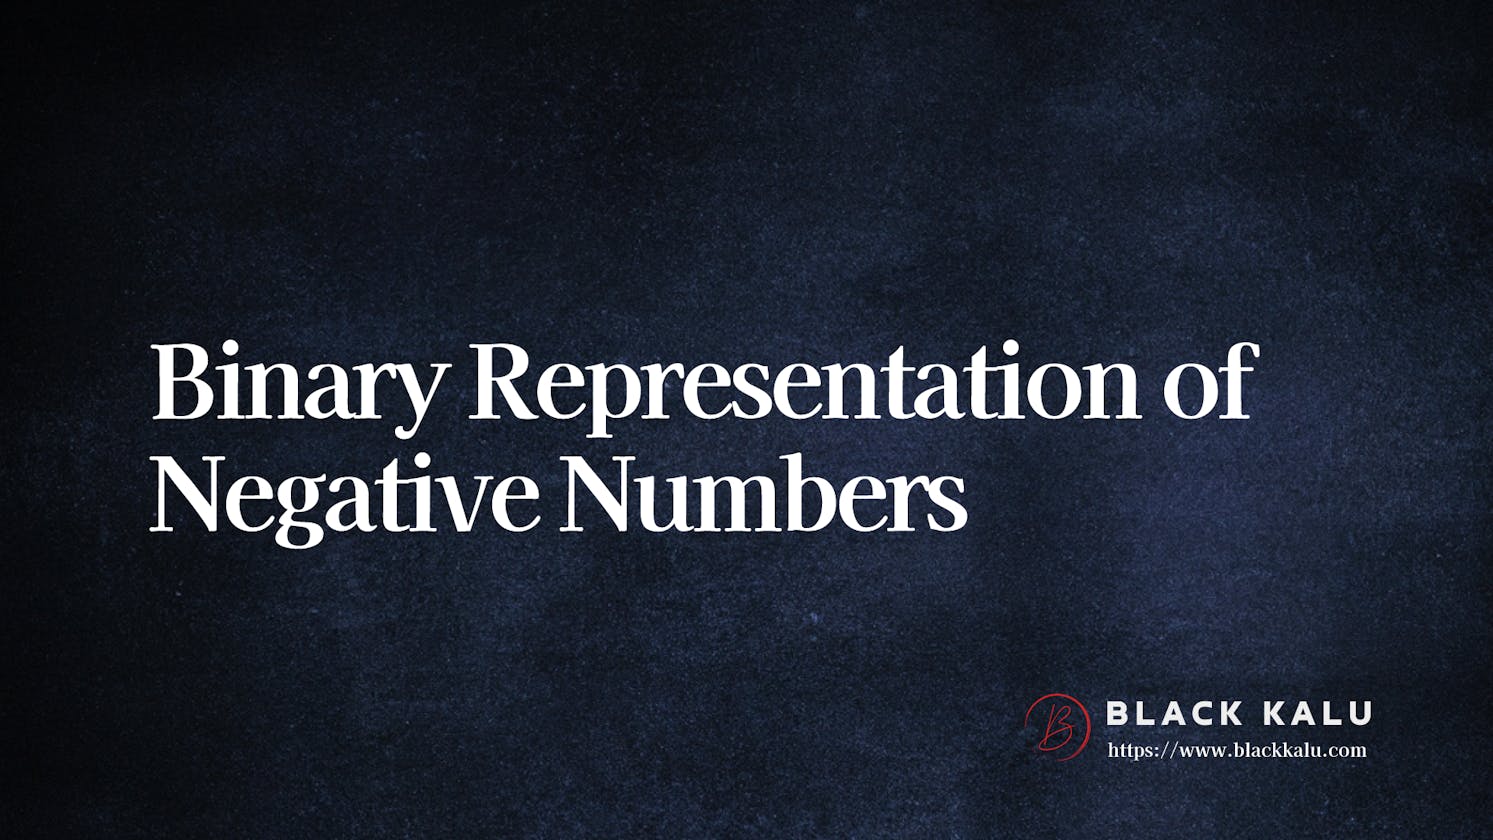 Representation of Negative Numbers in Binary